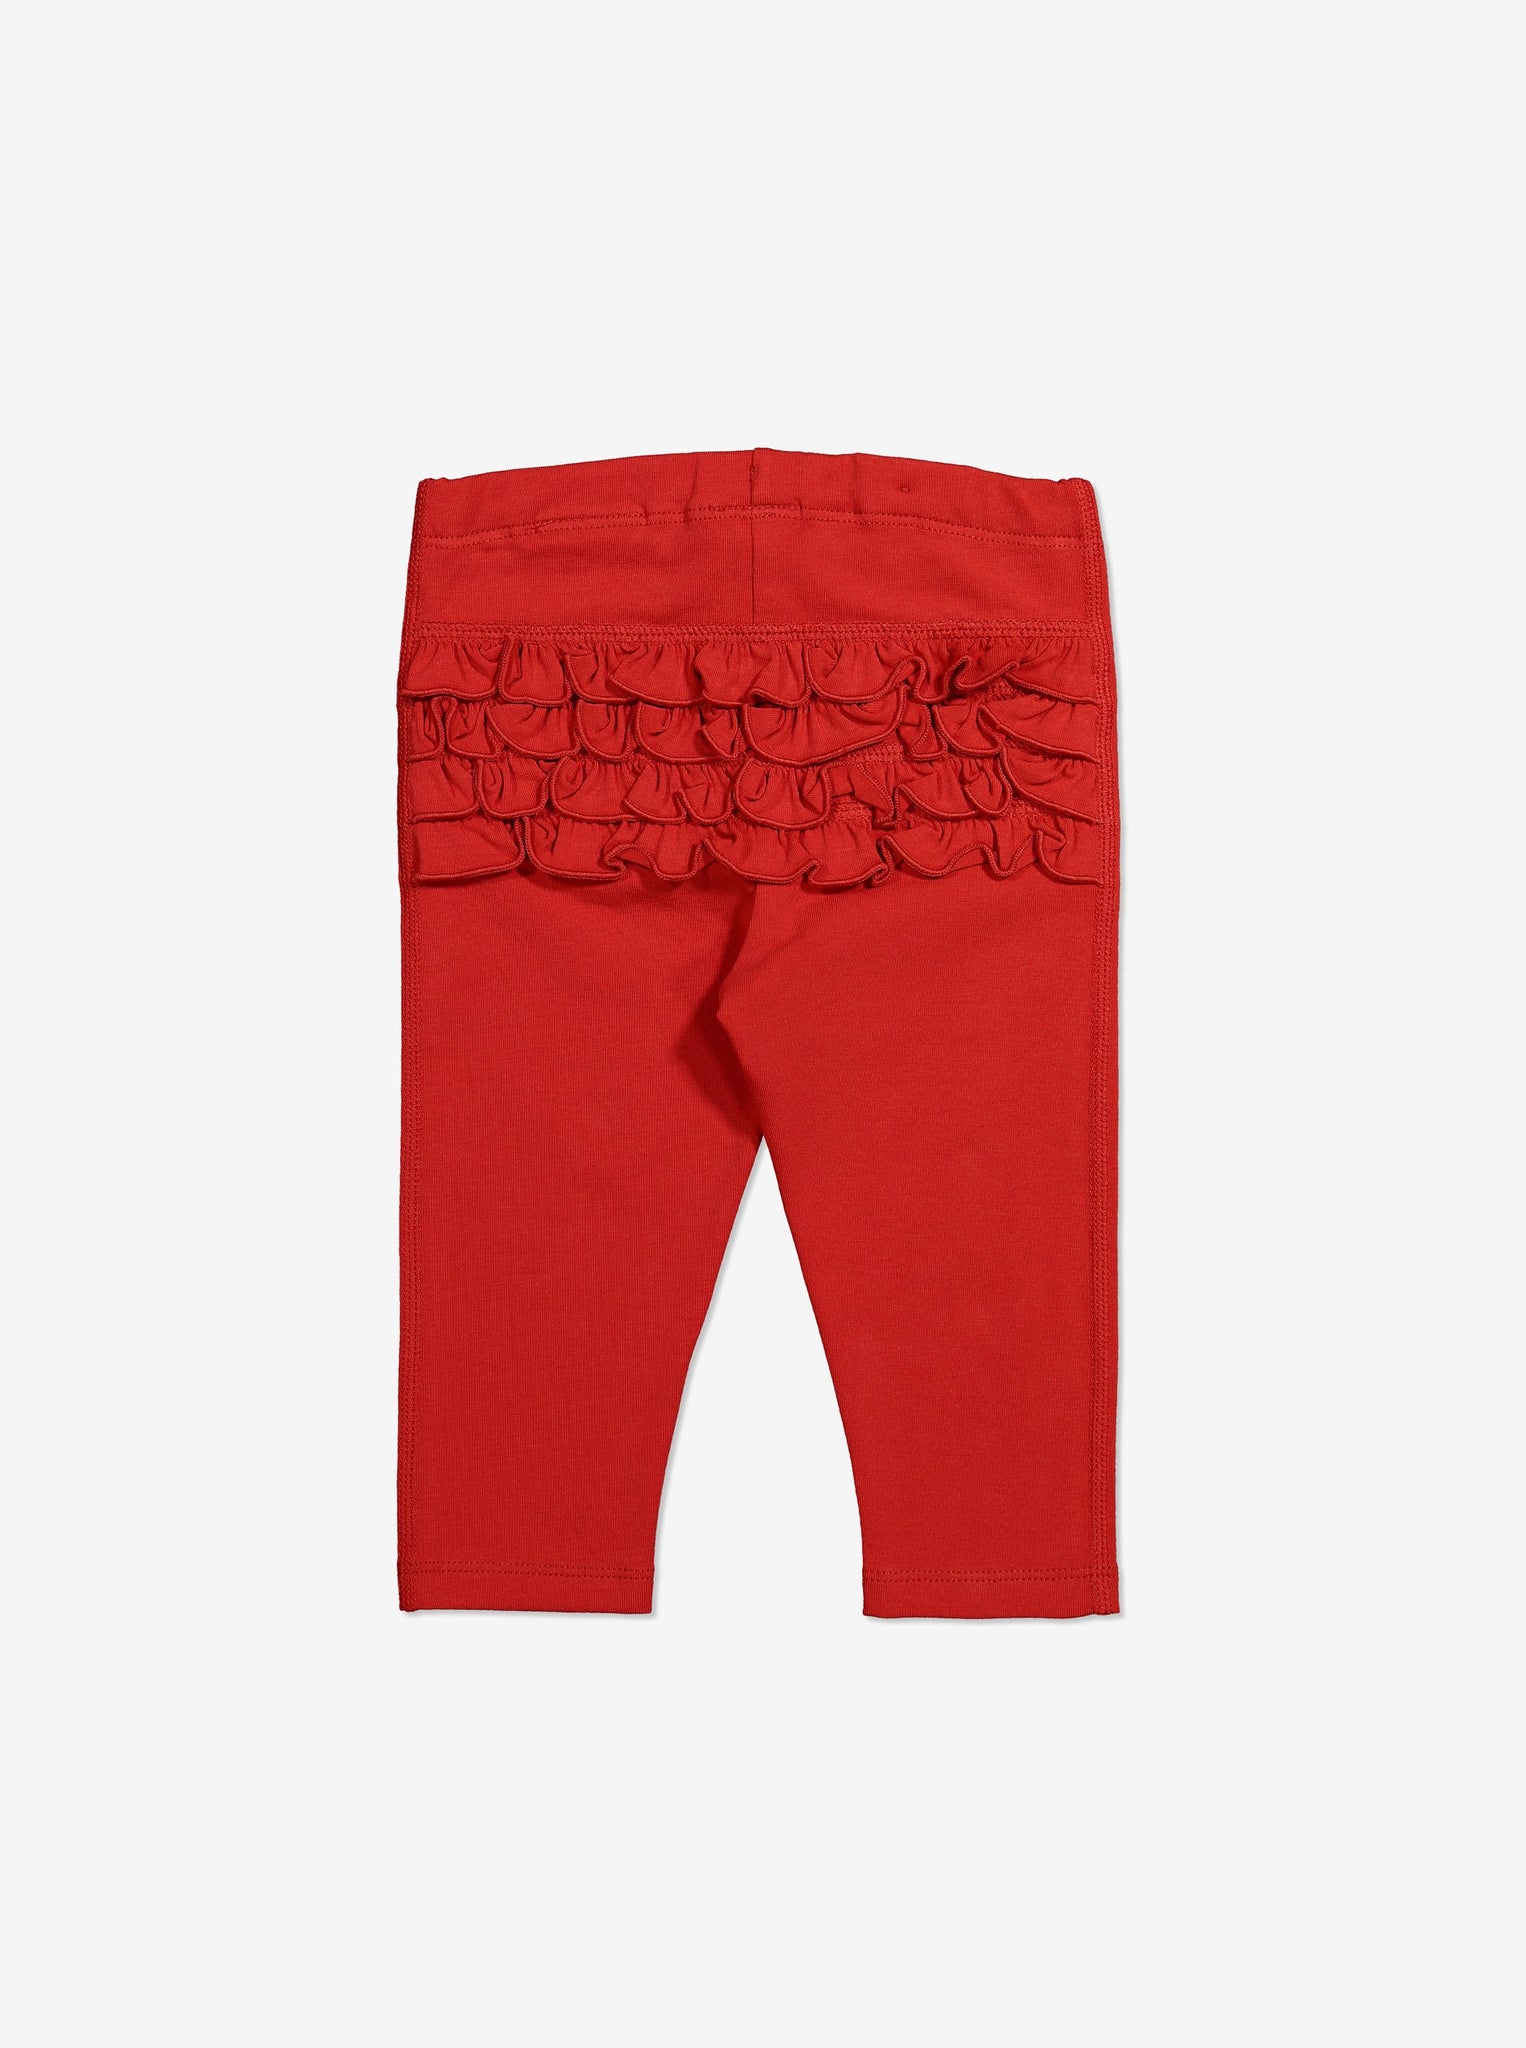 Ruffle Leggings For Girls, Kids Eco Clothes